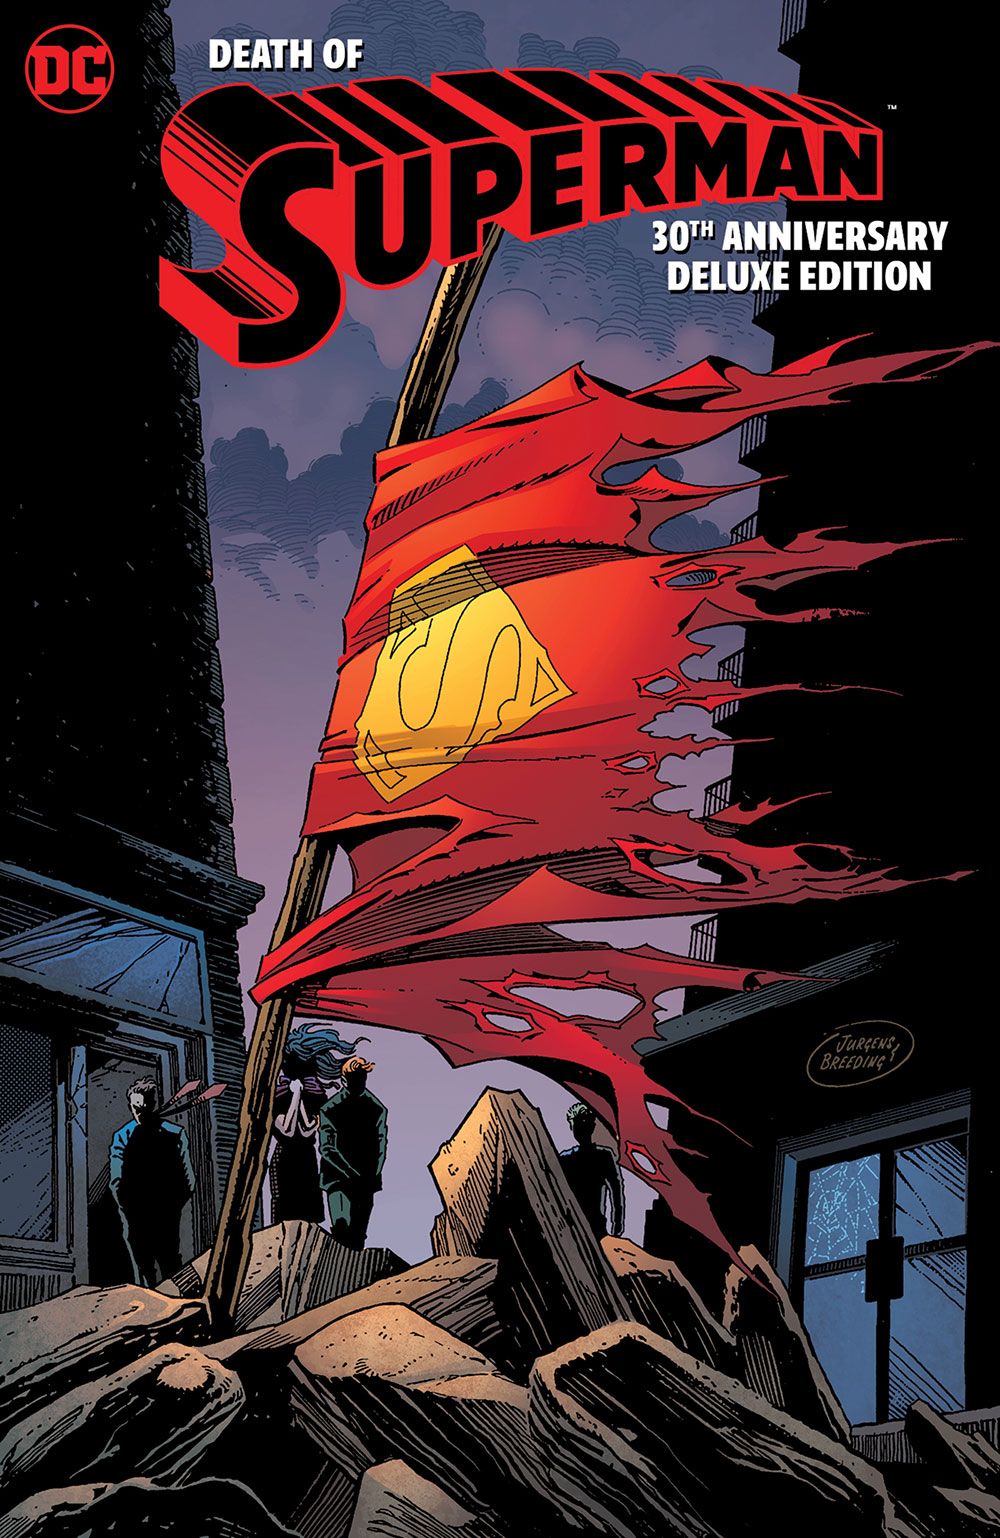 Death-of-Superman-30th-Anniversary-Deluxe-Edition-1